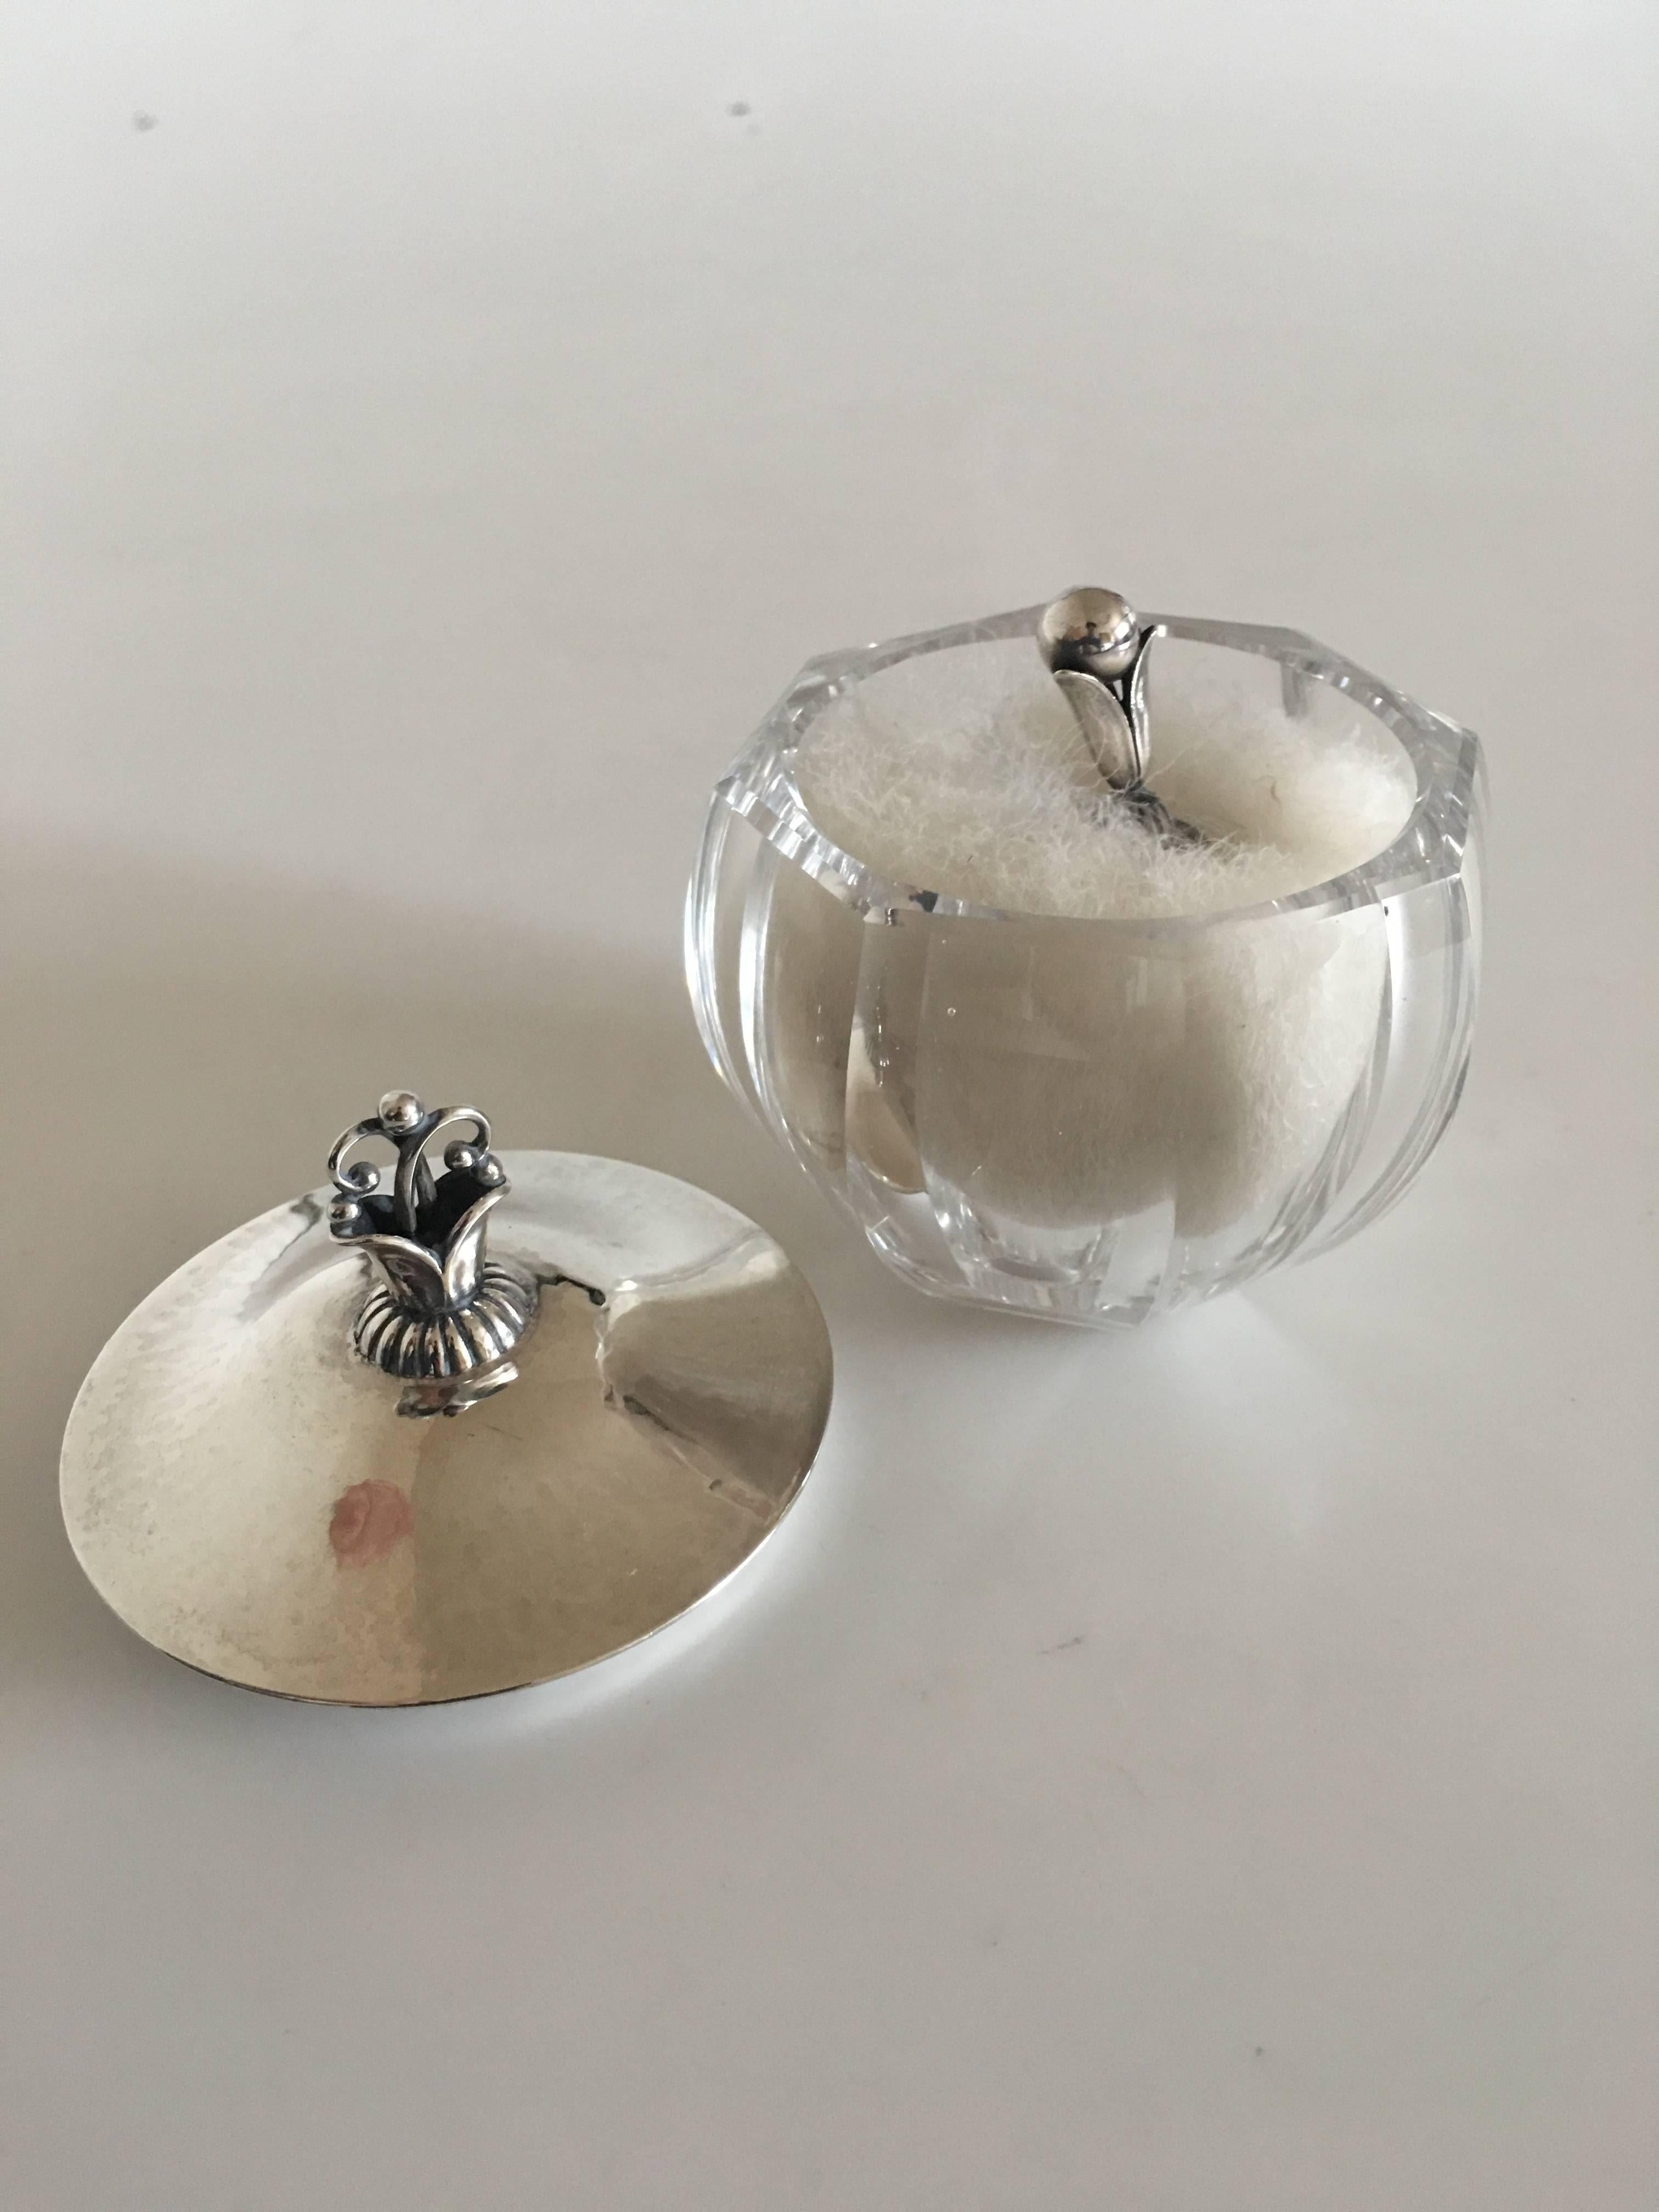 Georg Jensen body powder puff #172 in crystal jar with sterling silver Lid #172. With arly 1920s Georg Jensen Silver Marks. The glass and lid are in perfect condition. The powder puff looks nice, age considered. The glass measures 5.5 cm H (2